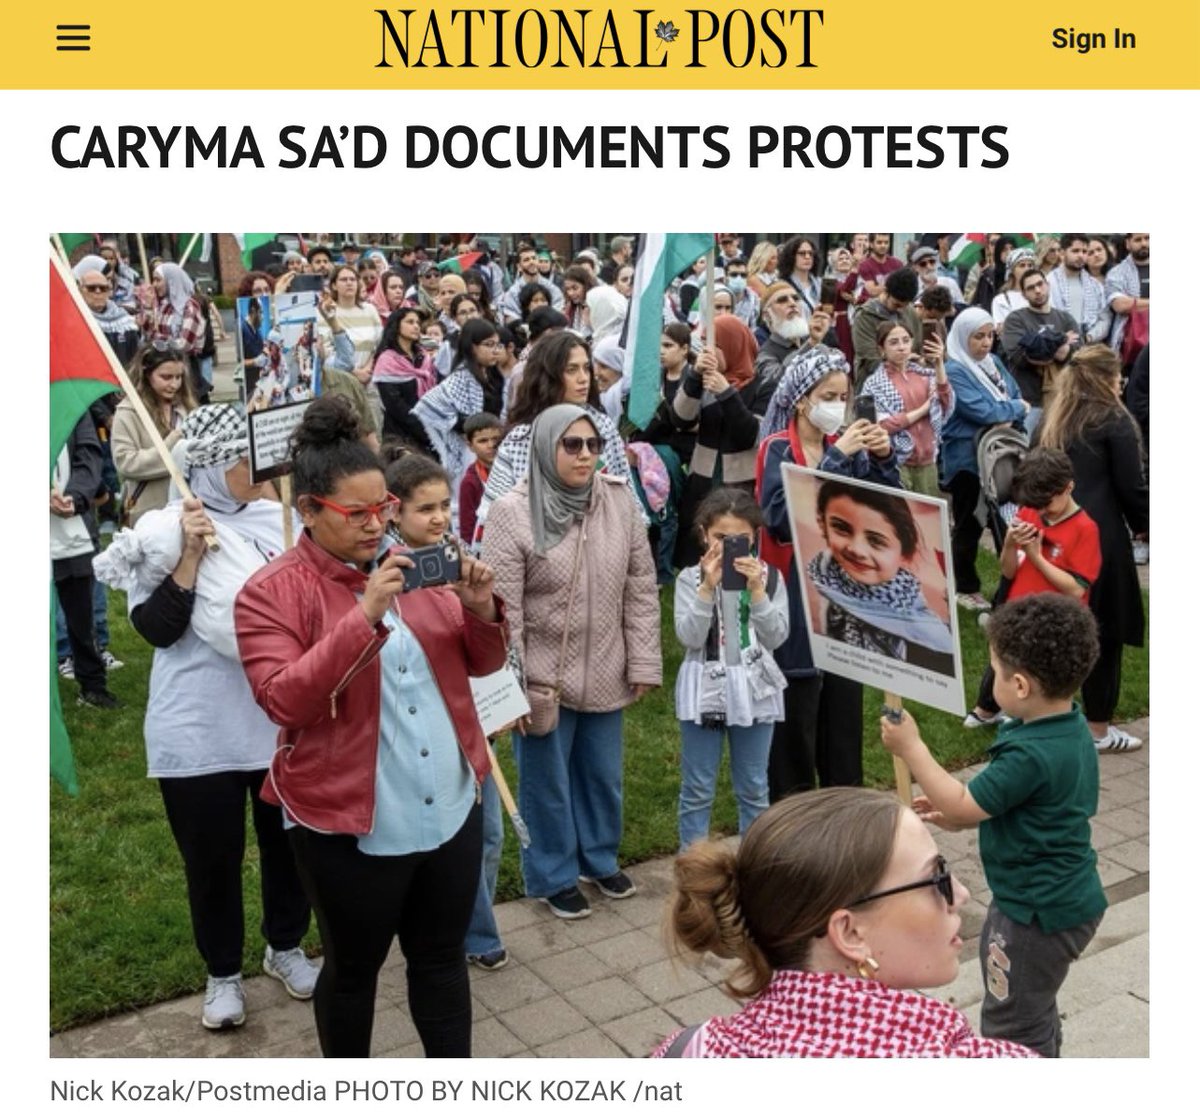 “Outside her work as a documentarian, she’s also notable for her investigations into 𝐃𝐢𝐚𝐠𝐨𝐥𝐨𝐧, a right-wing group that has been denounced as extremist. Sa’d, in turn, has argued that police relied too heavily on material from the 𝐂𝐚𝐧𝐚𝐝𝐢𝐚𝐧 𝐀𝐧𝐭𝐢-𝐇𝐚𝐭𝐞…